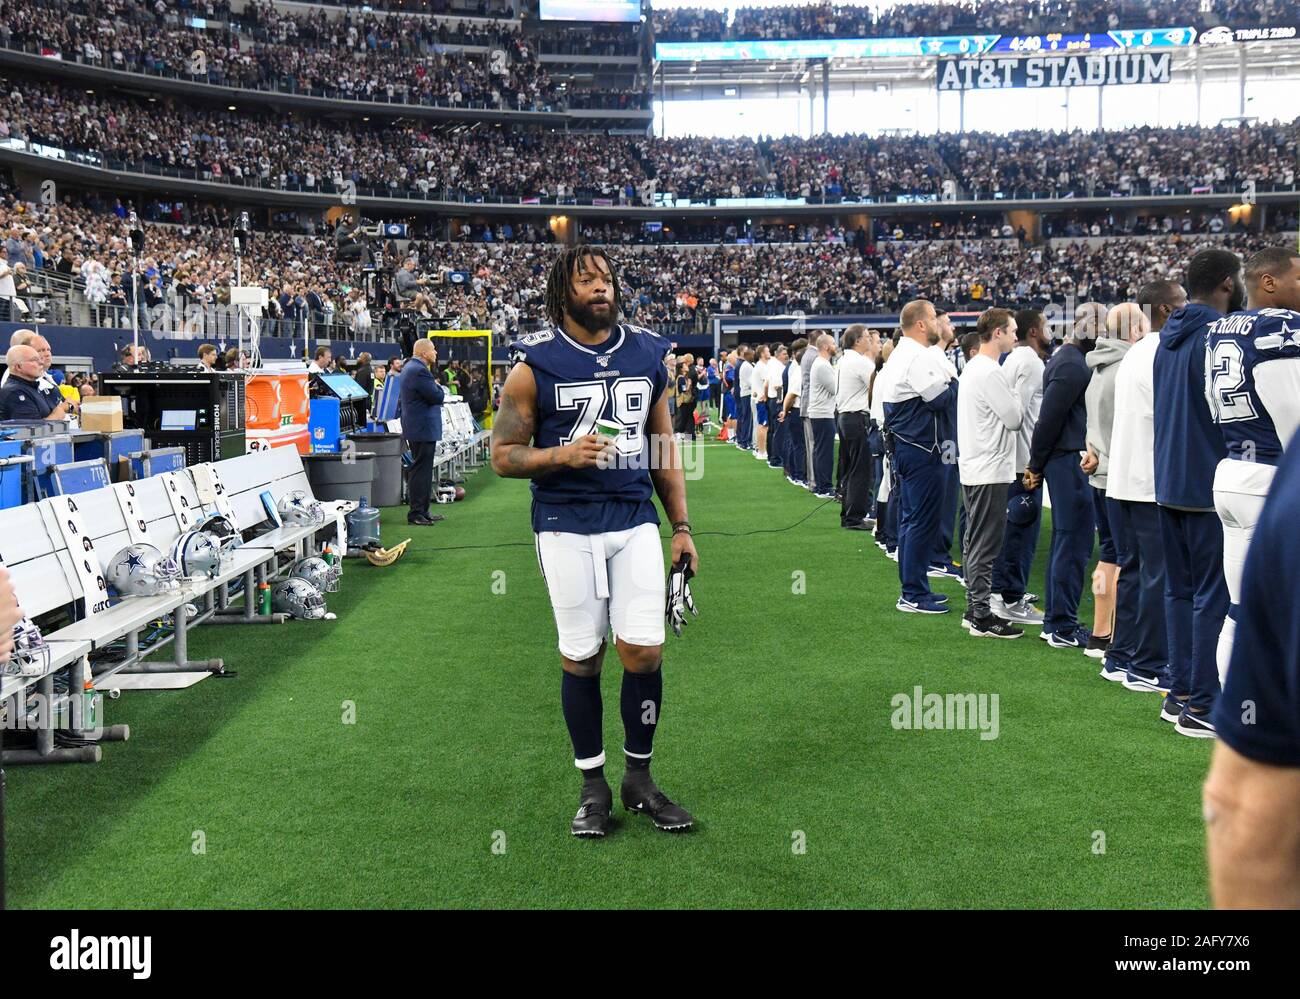 Dec 15, 2019: Dallas Cowboys Michael Bennett #79 stands behind the team during the National Anthem during an NFL game between the Los Angeles Rams and the Dallas Cowboys at AT&T Stadium in Arlington, TX Dallas defeated Los Angeles 44-21 Albert Pena/CSM Stock Photo